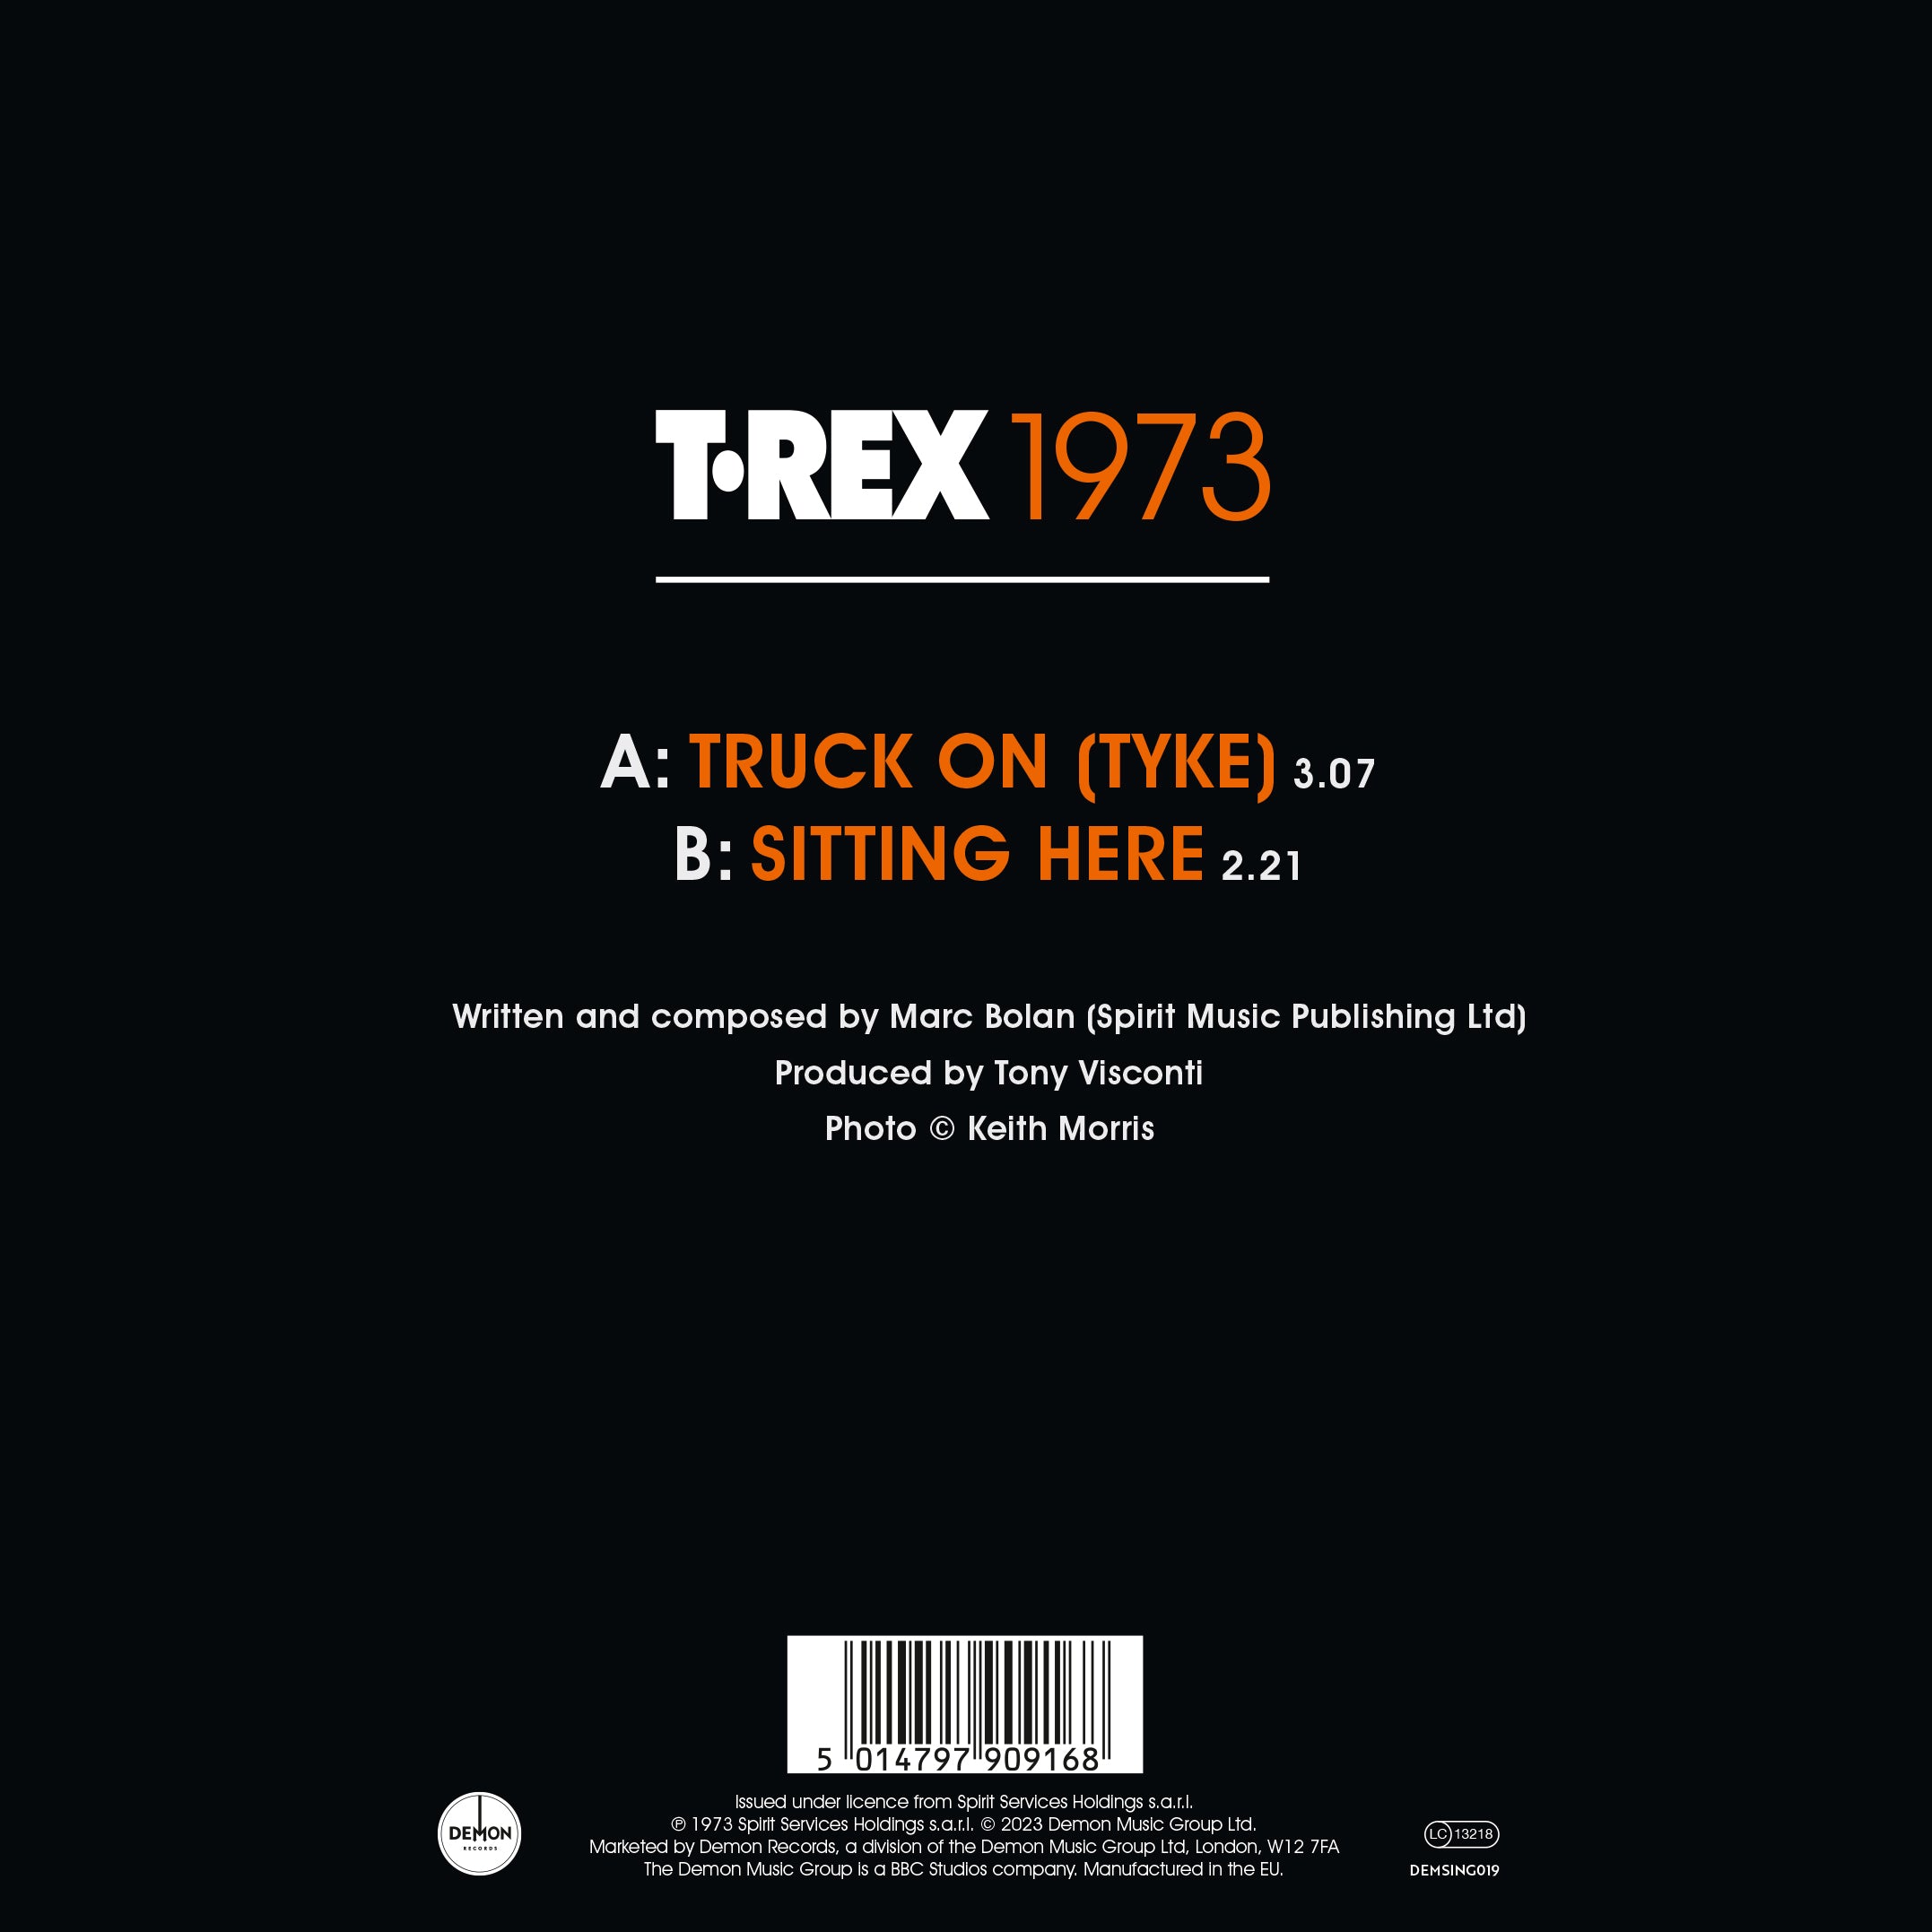 T. Rex - Truck-On Tyke (50th Anniversary): Limited Vinyl 7" Picture Disc